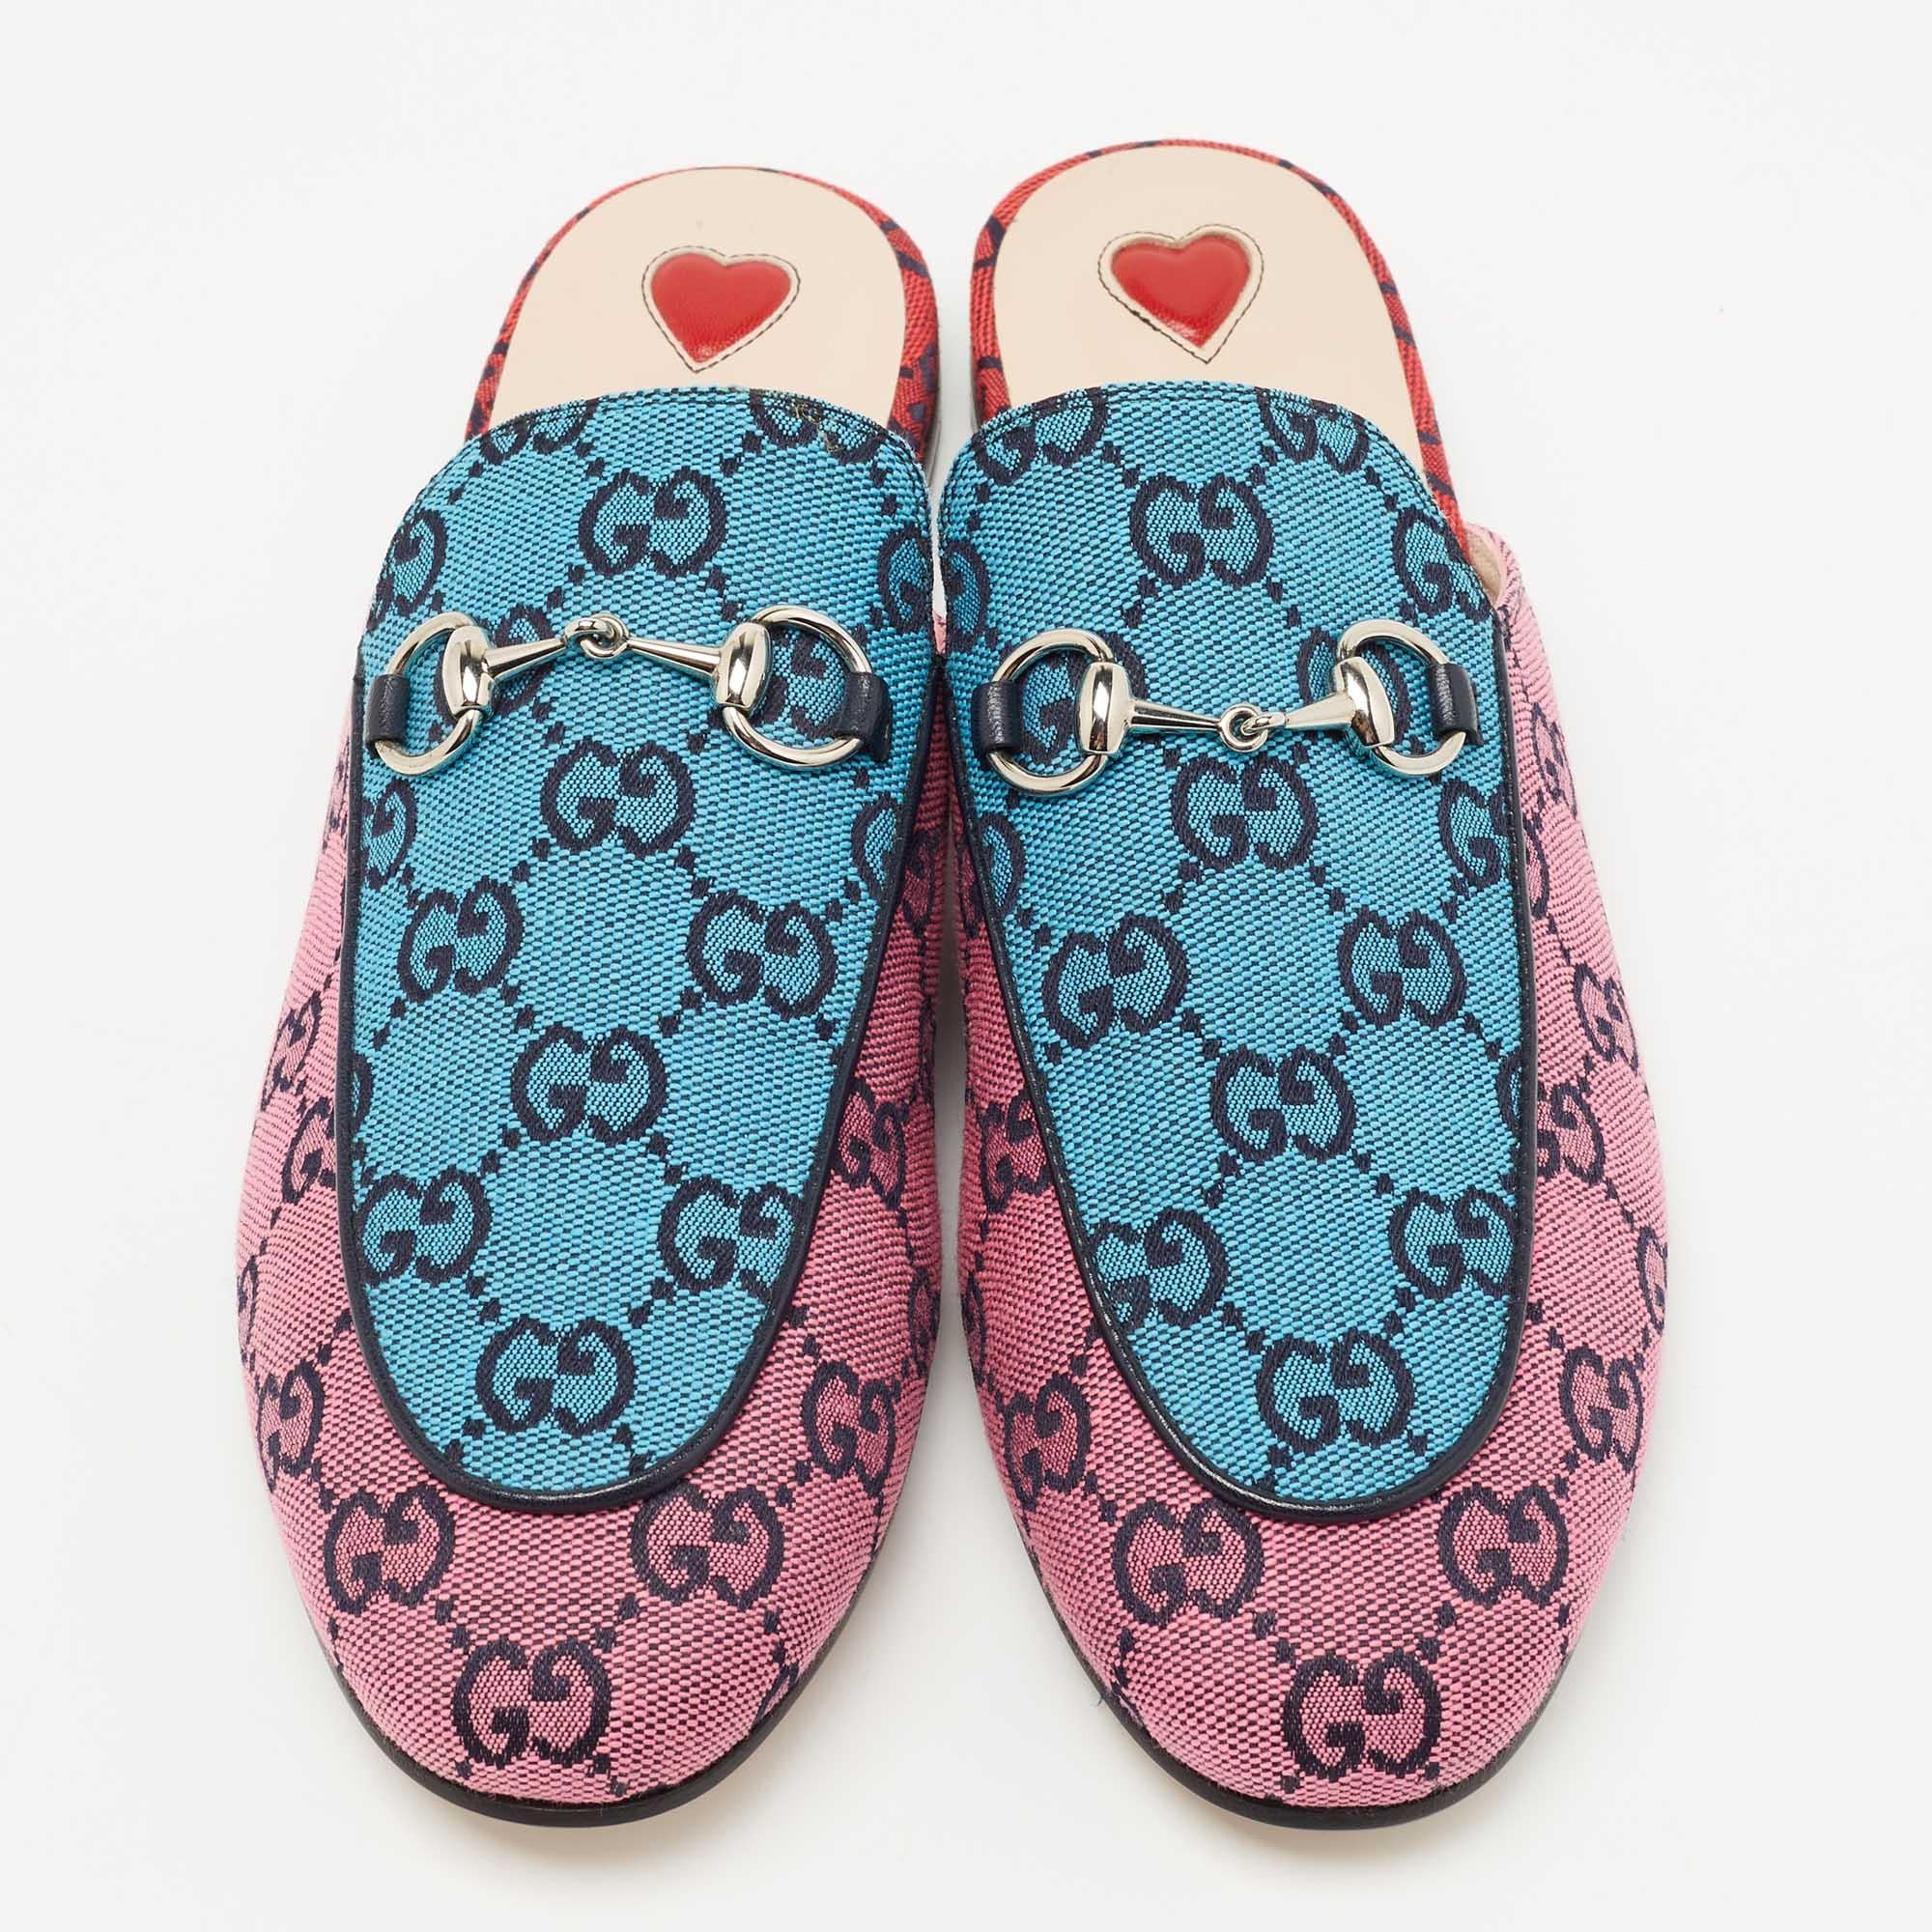 These Gucci Princetown mules are a fresh update on the perennially chic Gucci loafers. These shoes are enhanced by a Horsebit detail that has defined the Gucci collection since the very beginning.

Includes: Original Dustbag

